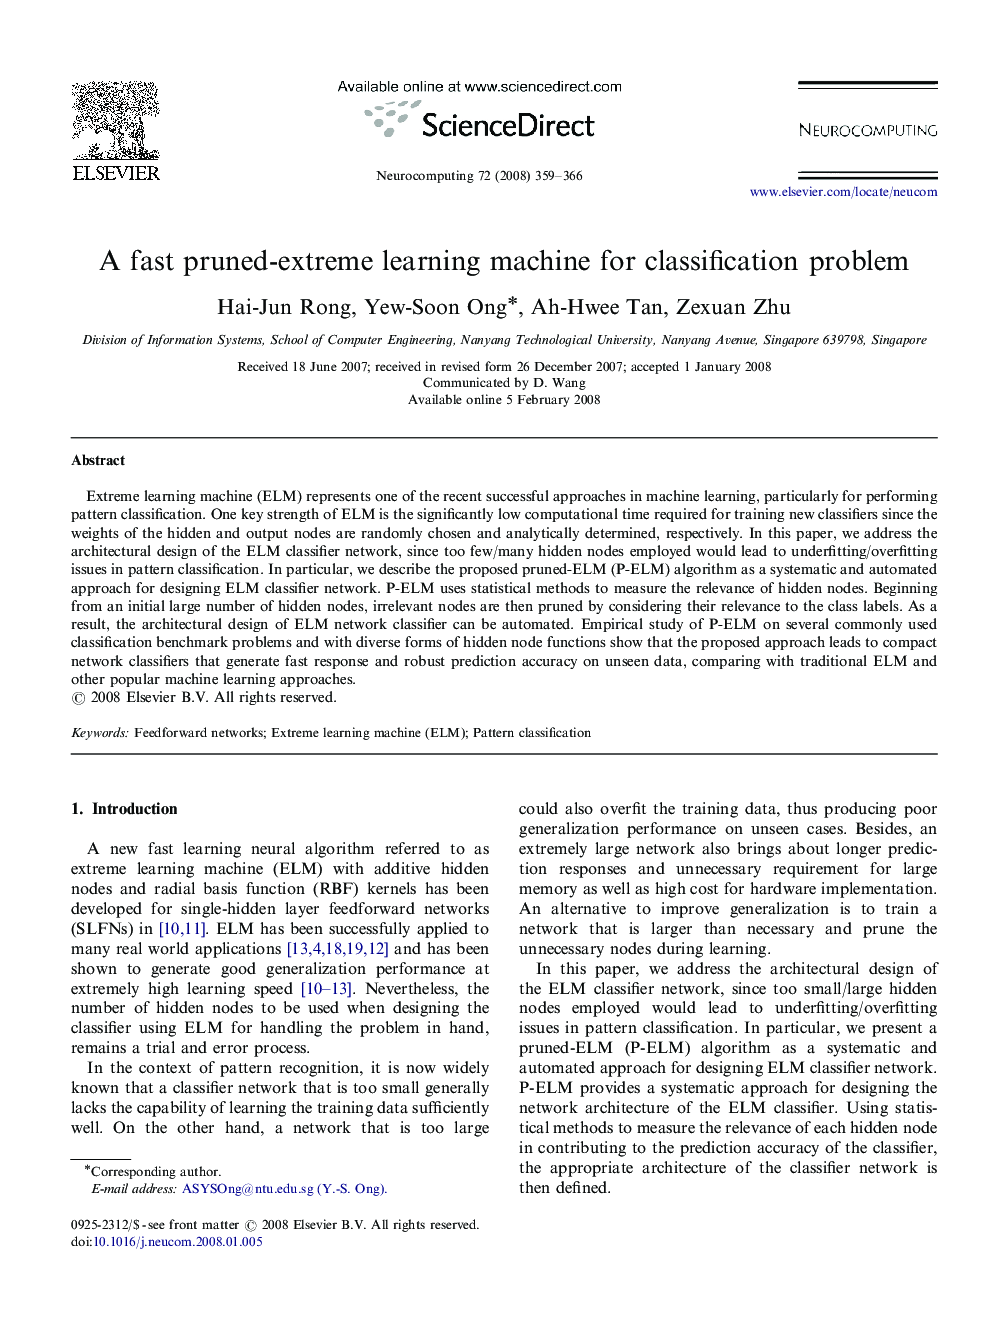 A fast pruned-extreme learning machine for classification problem